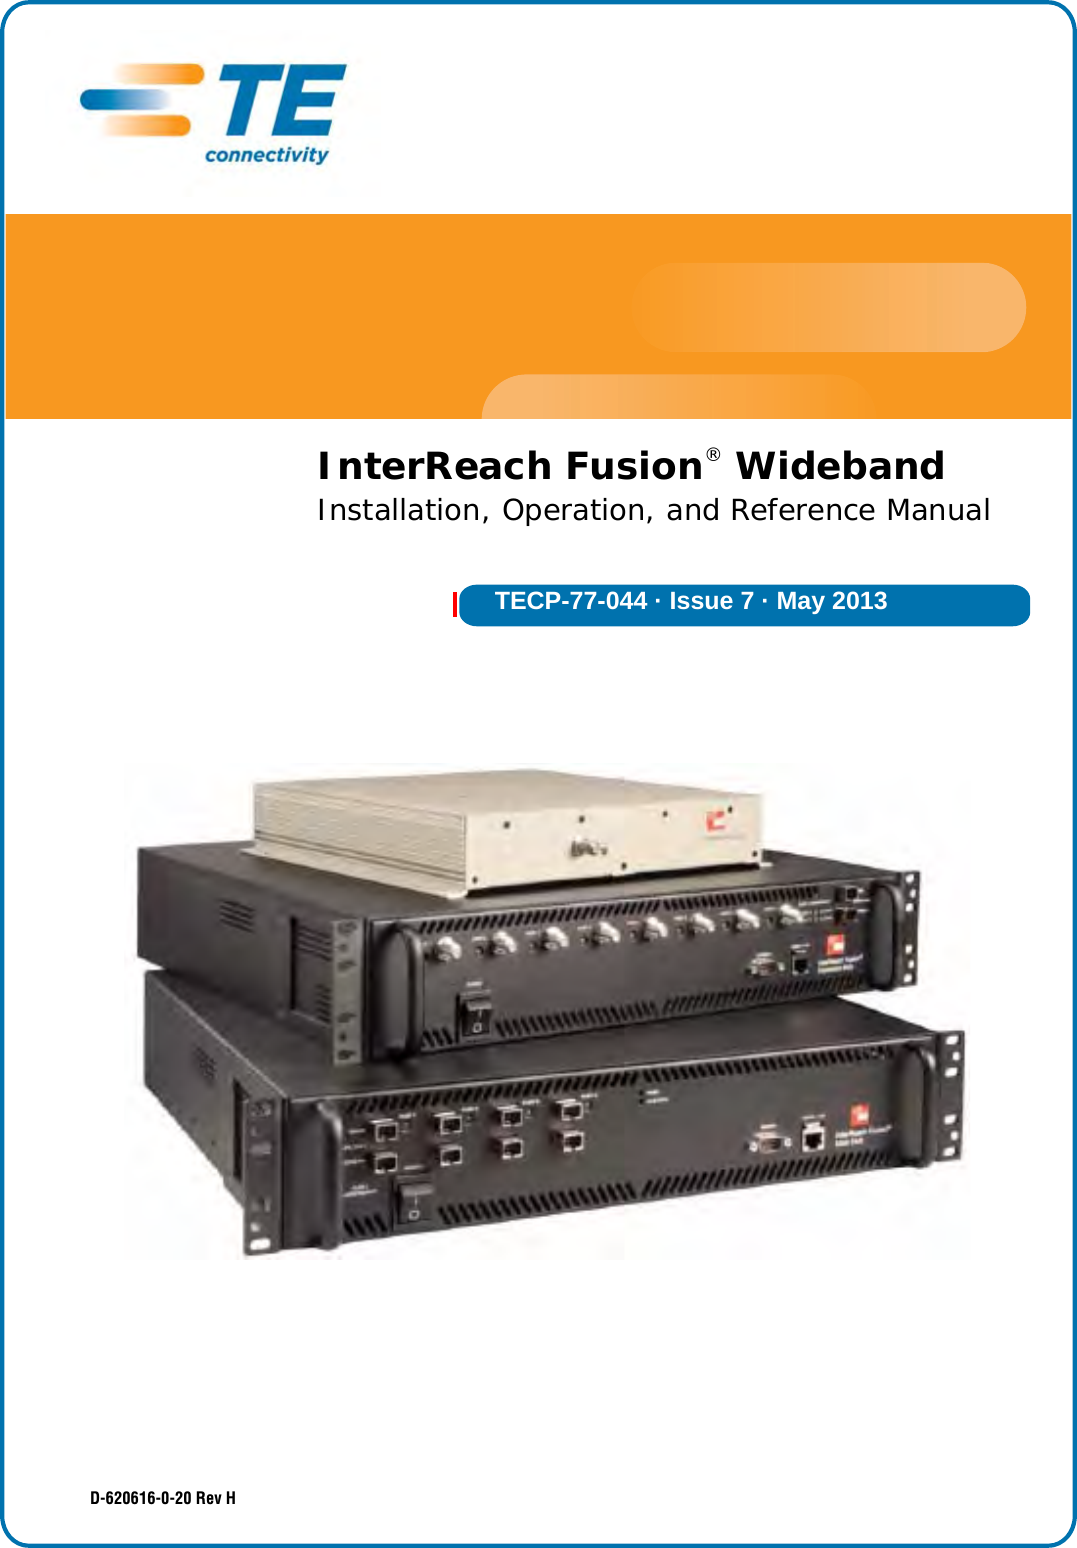 TECP-77-044 · Issue 7 · May 2013D-620616-0-20 Rev HInterReach Fusion® WidebandInstallation, Operation, and Reference Manual